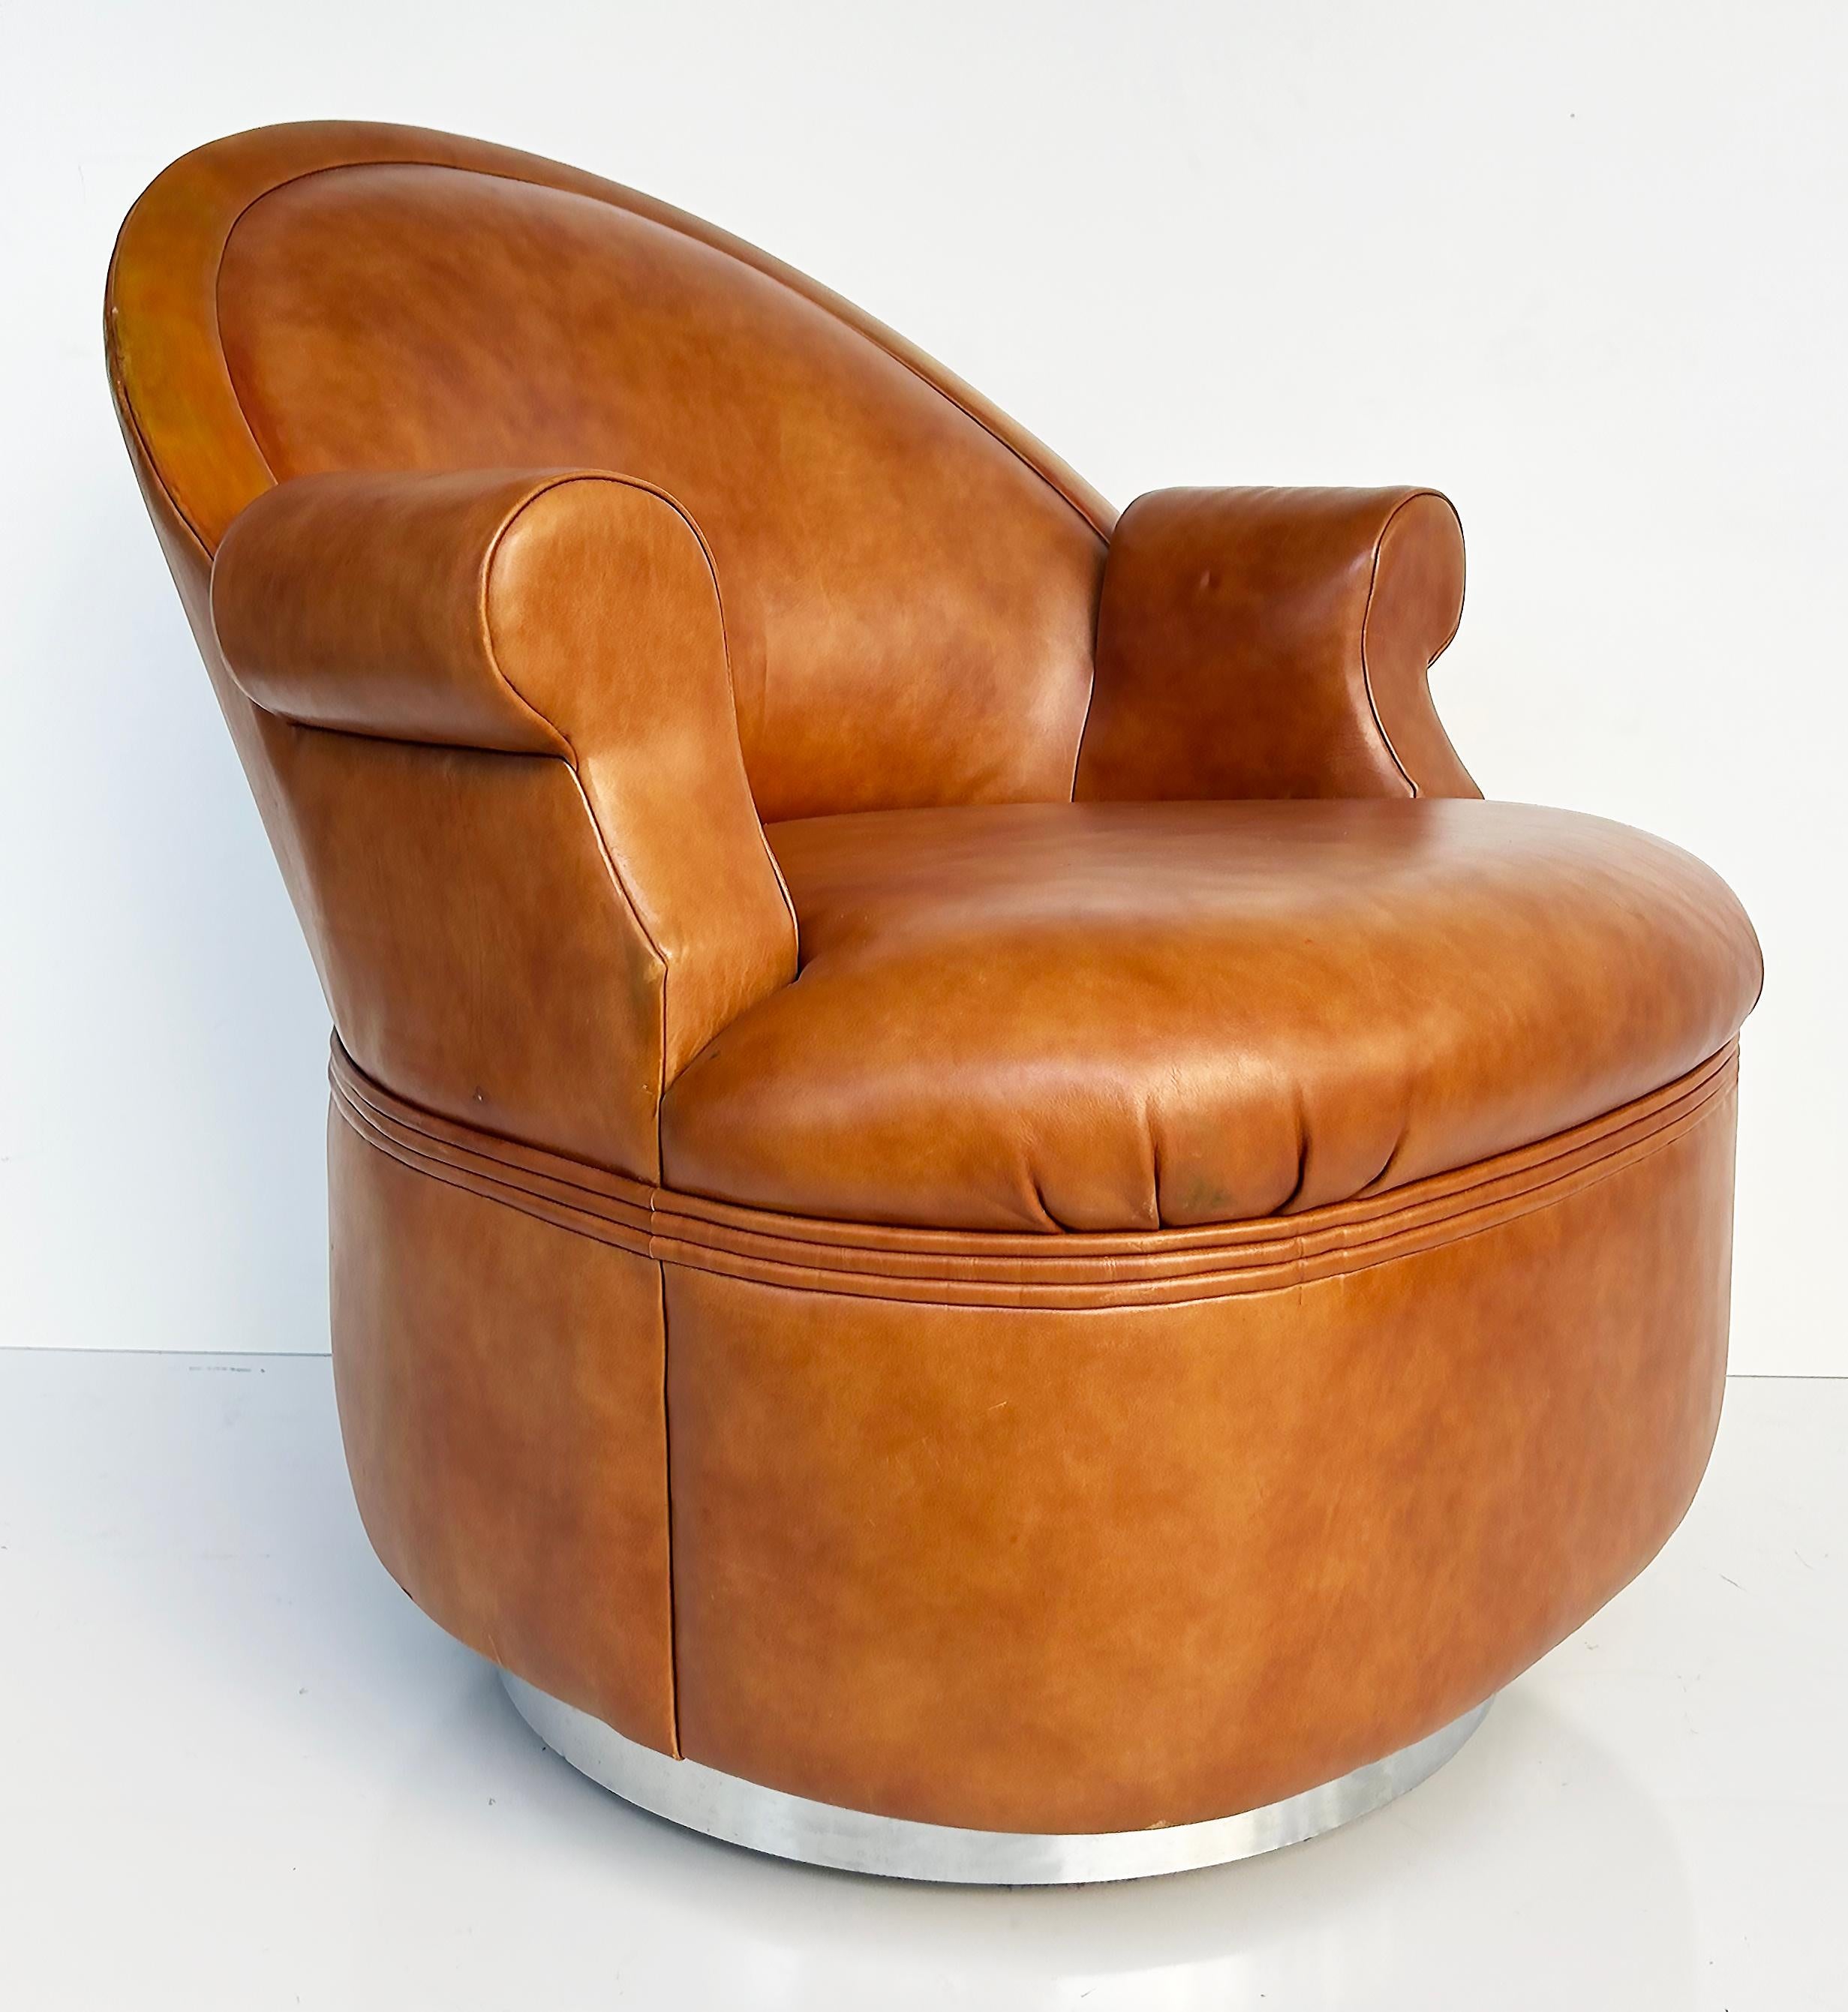 American  Steve Chase Martin Brattrud Chrome Leather Swivel Chairs on Casters- A Pair For Sale